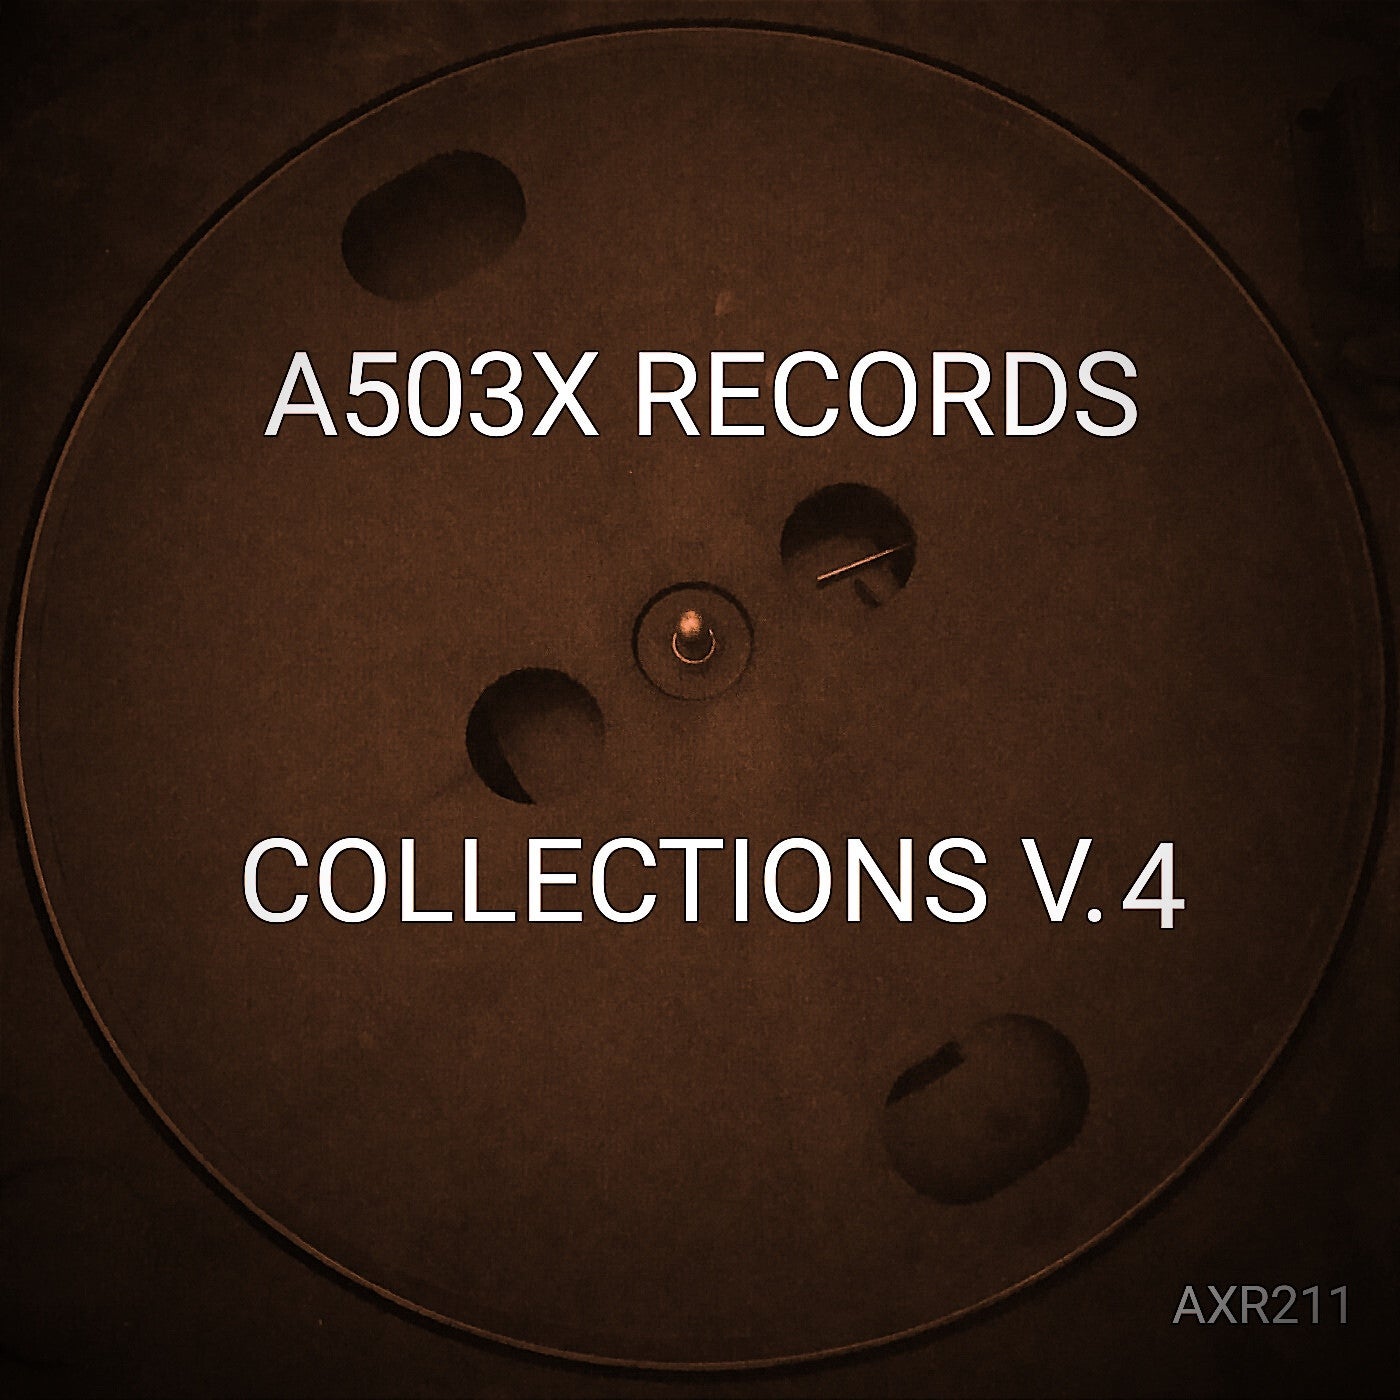 A503X RECORDS COLLECTIONS V.4